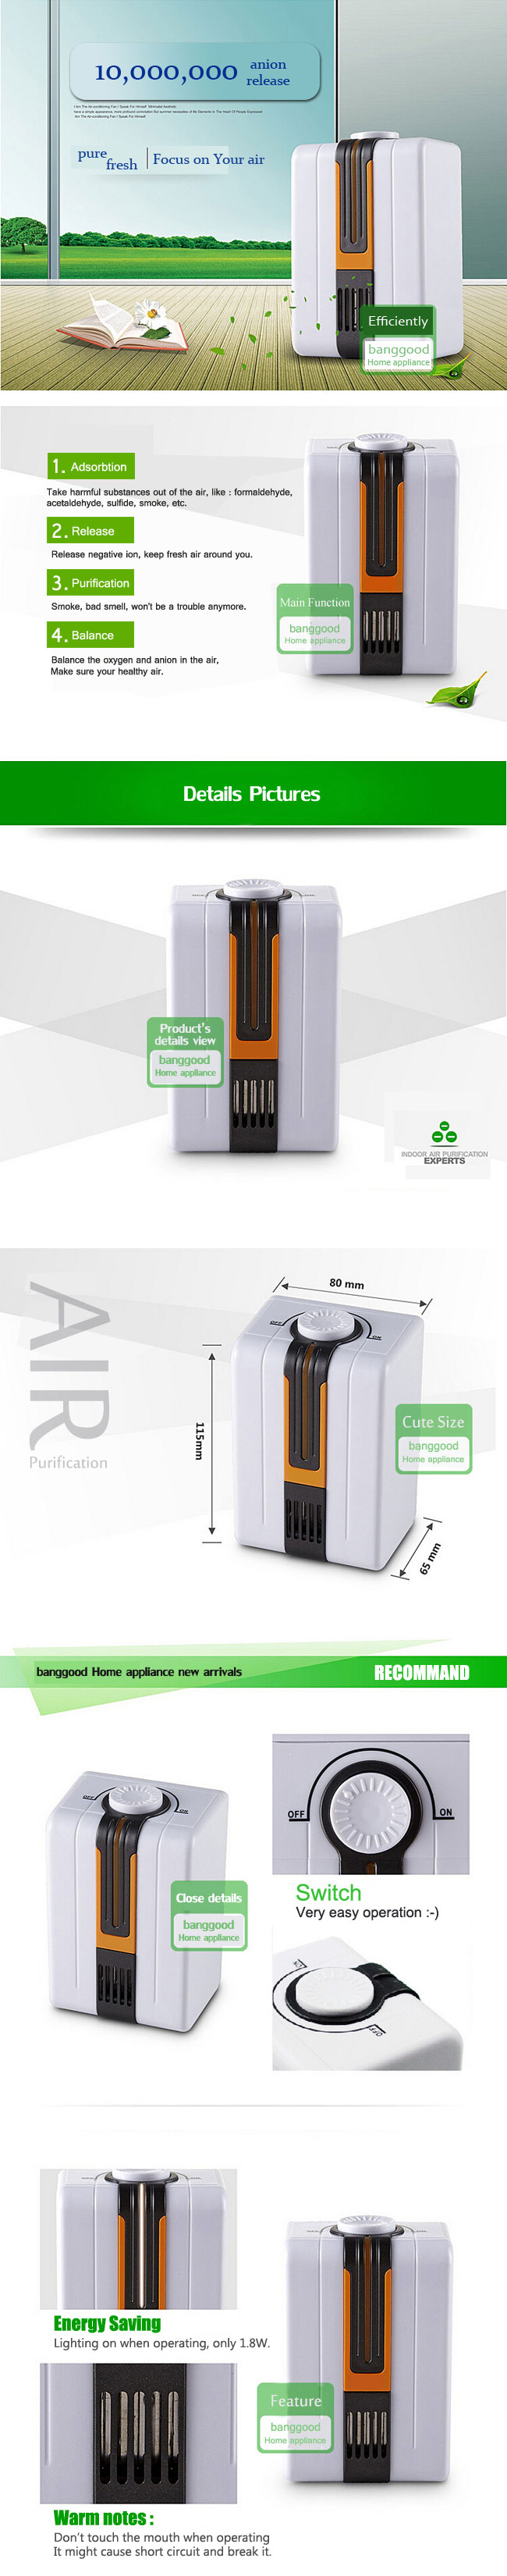 ANJ-110-240V-Negative-Ion-Anion-Home-Mini-Air-Purifier-Ozonator-Purify-Cleaner-with-Adapter-960843